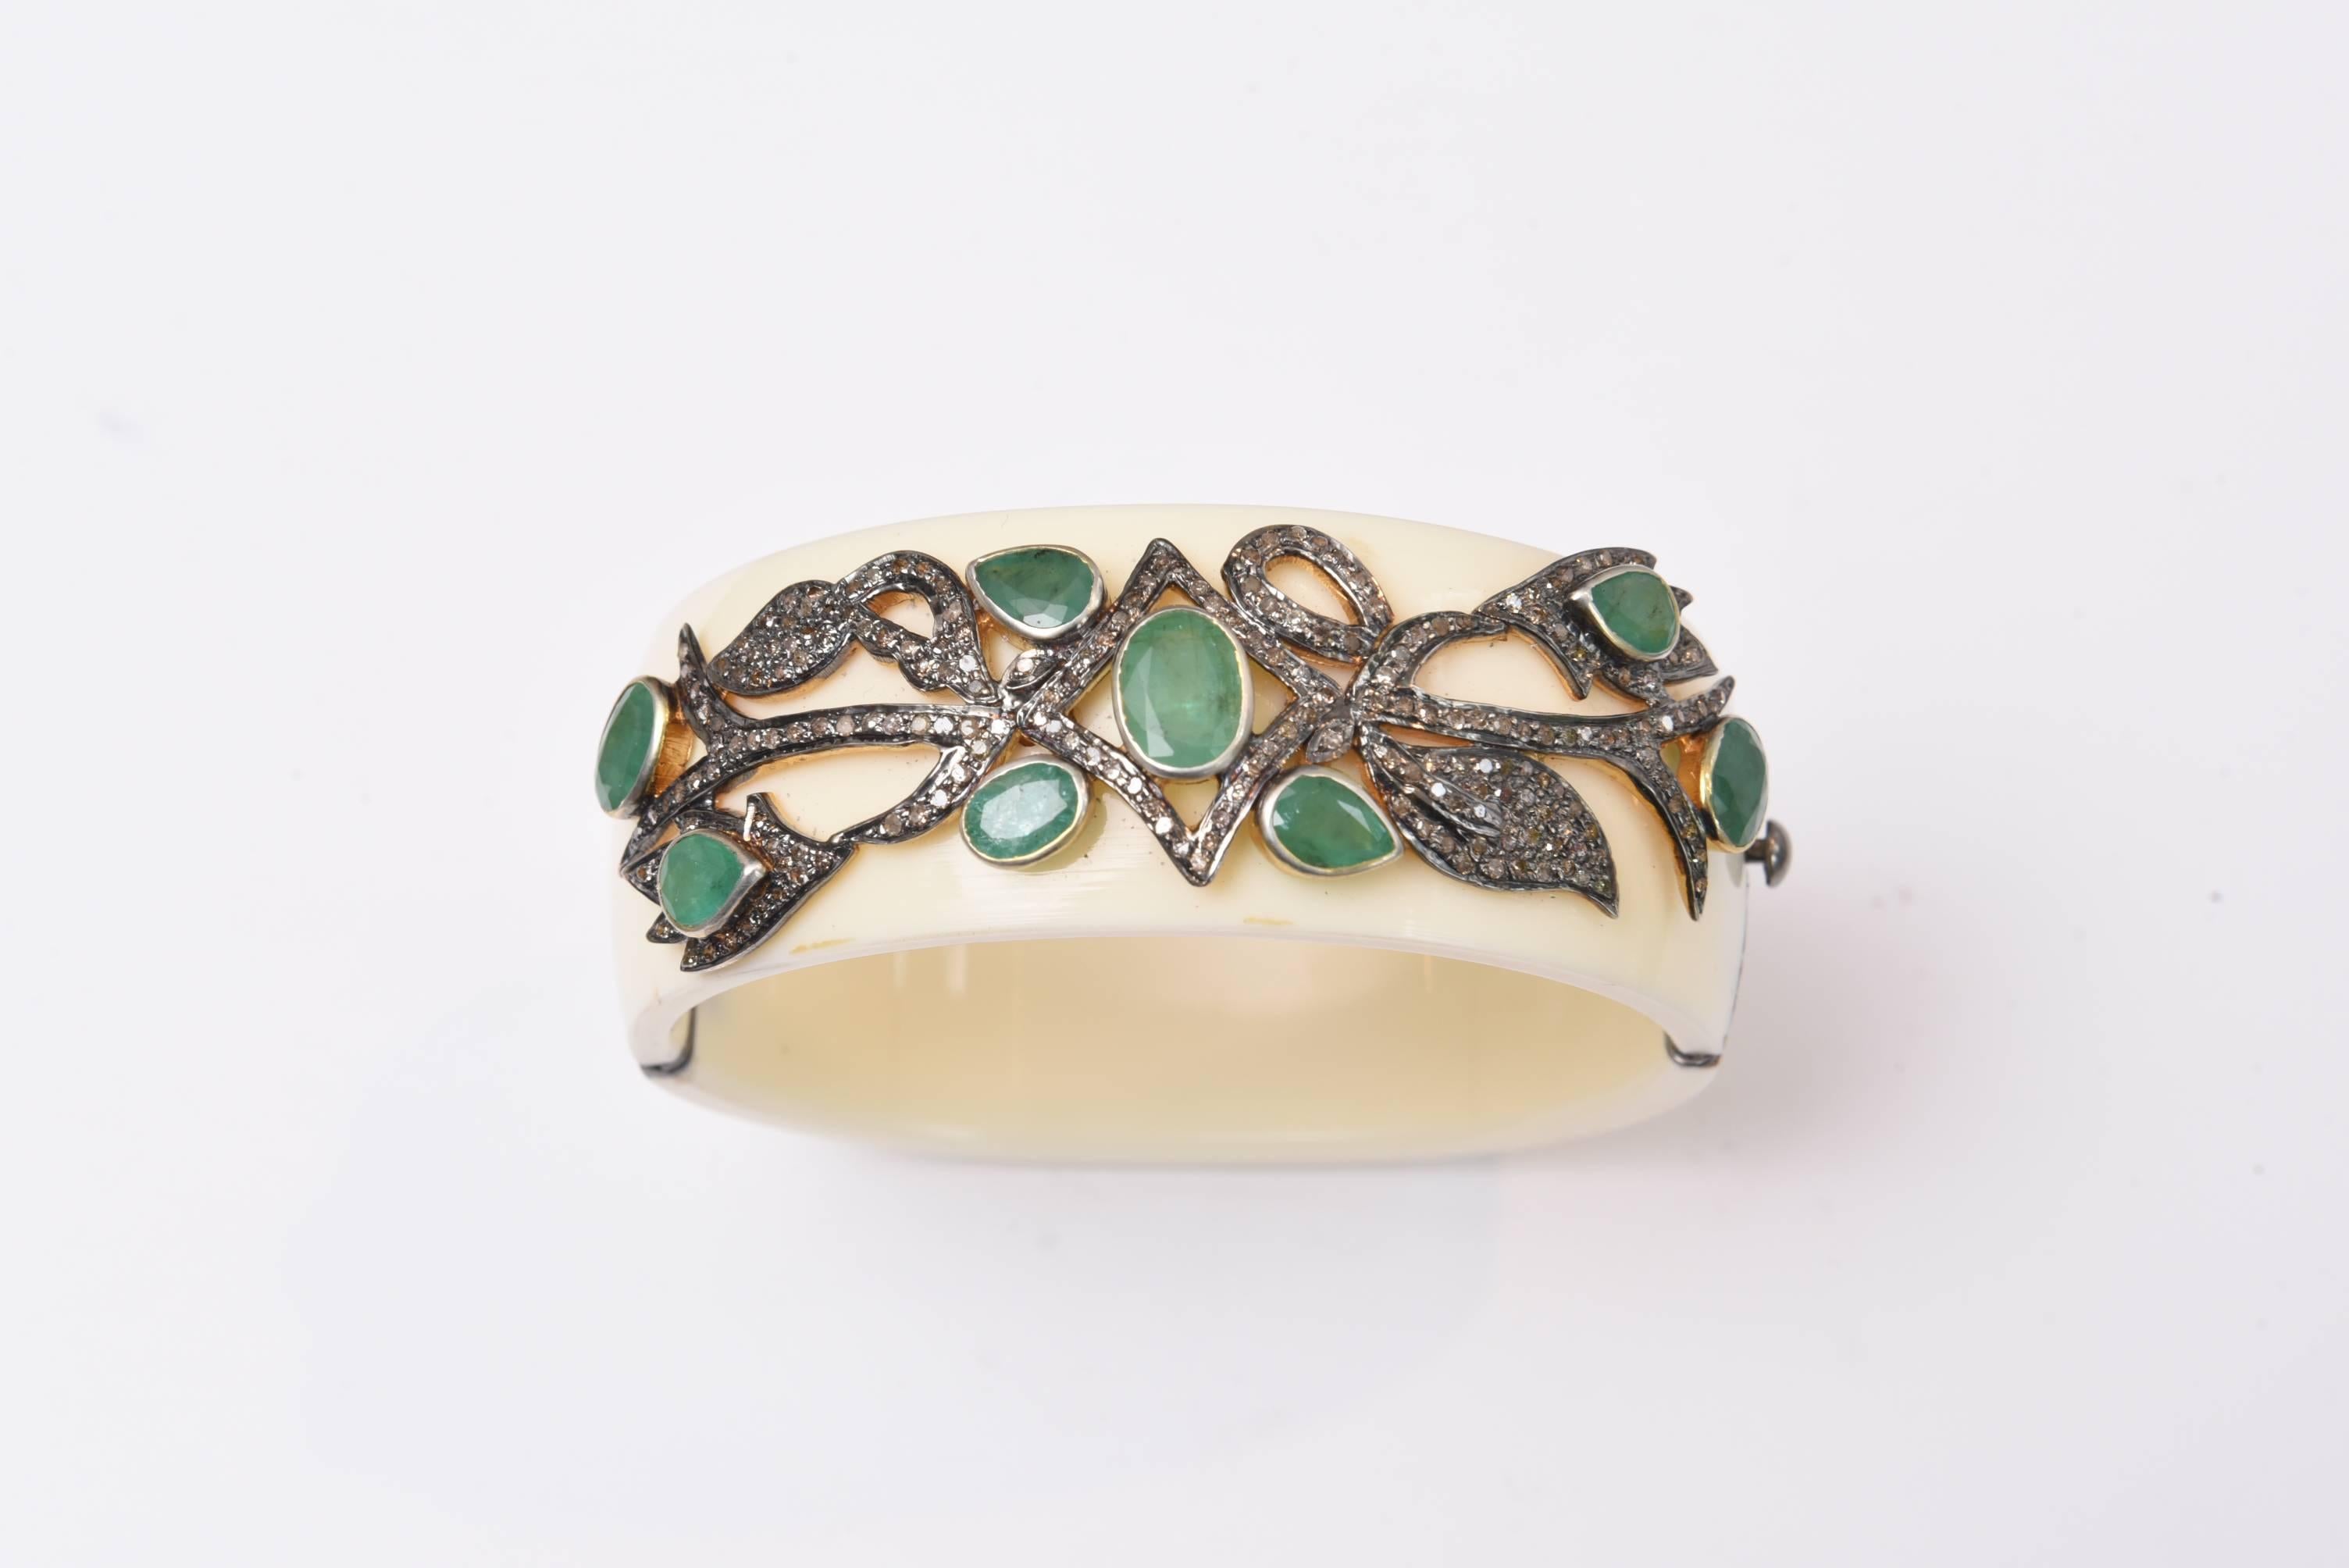 Fabulous Bakelite cuff bracelet with pave` set diamonds and faceted emeralds set in oxidized sterling silver.  Nice oval shape keeps the bracelet from turning over.  Carat weight of emeralds is 7.55 and diamond weight is 1.47 carats.  Push clasp. 